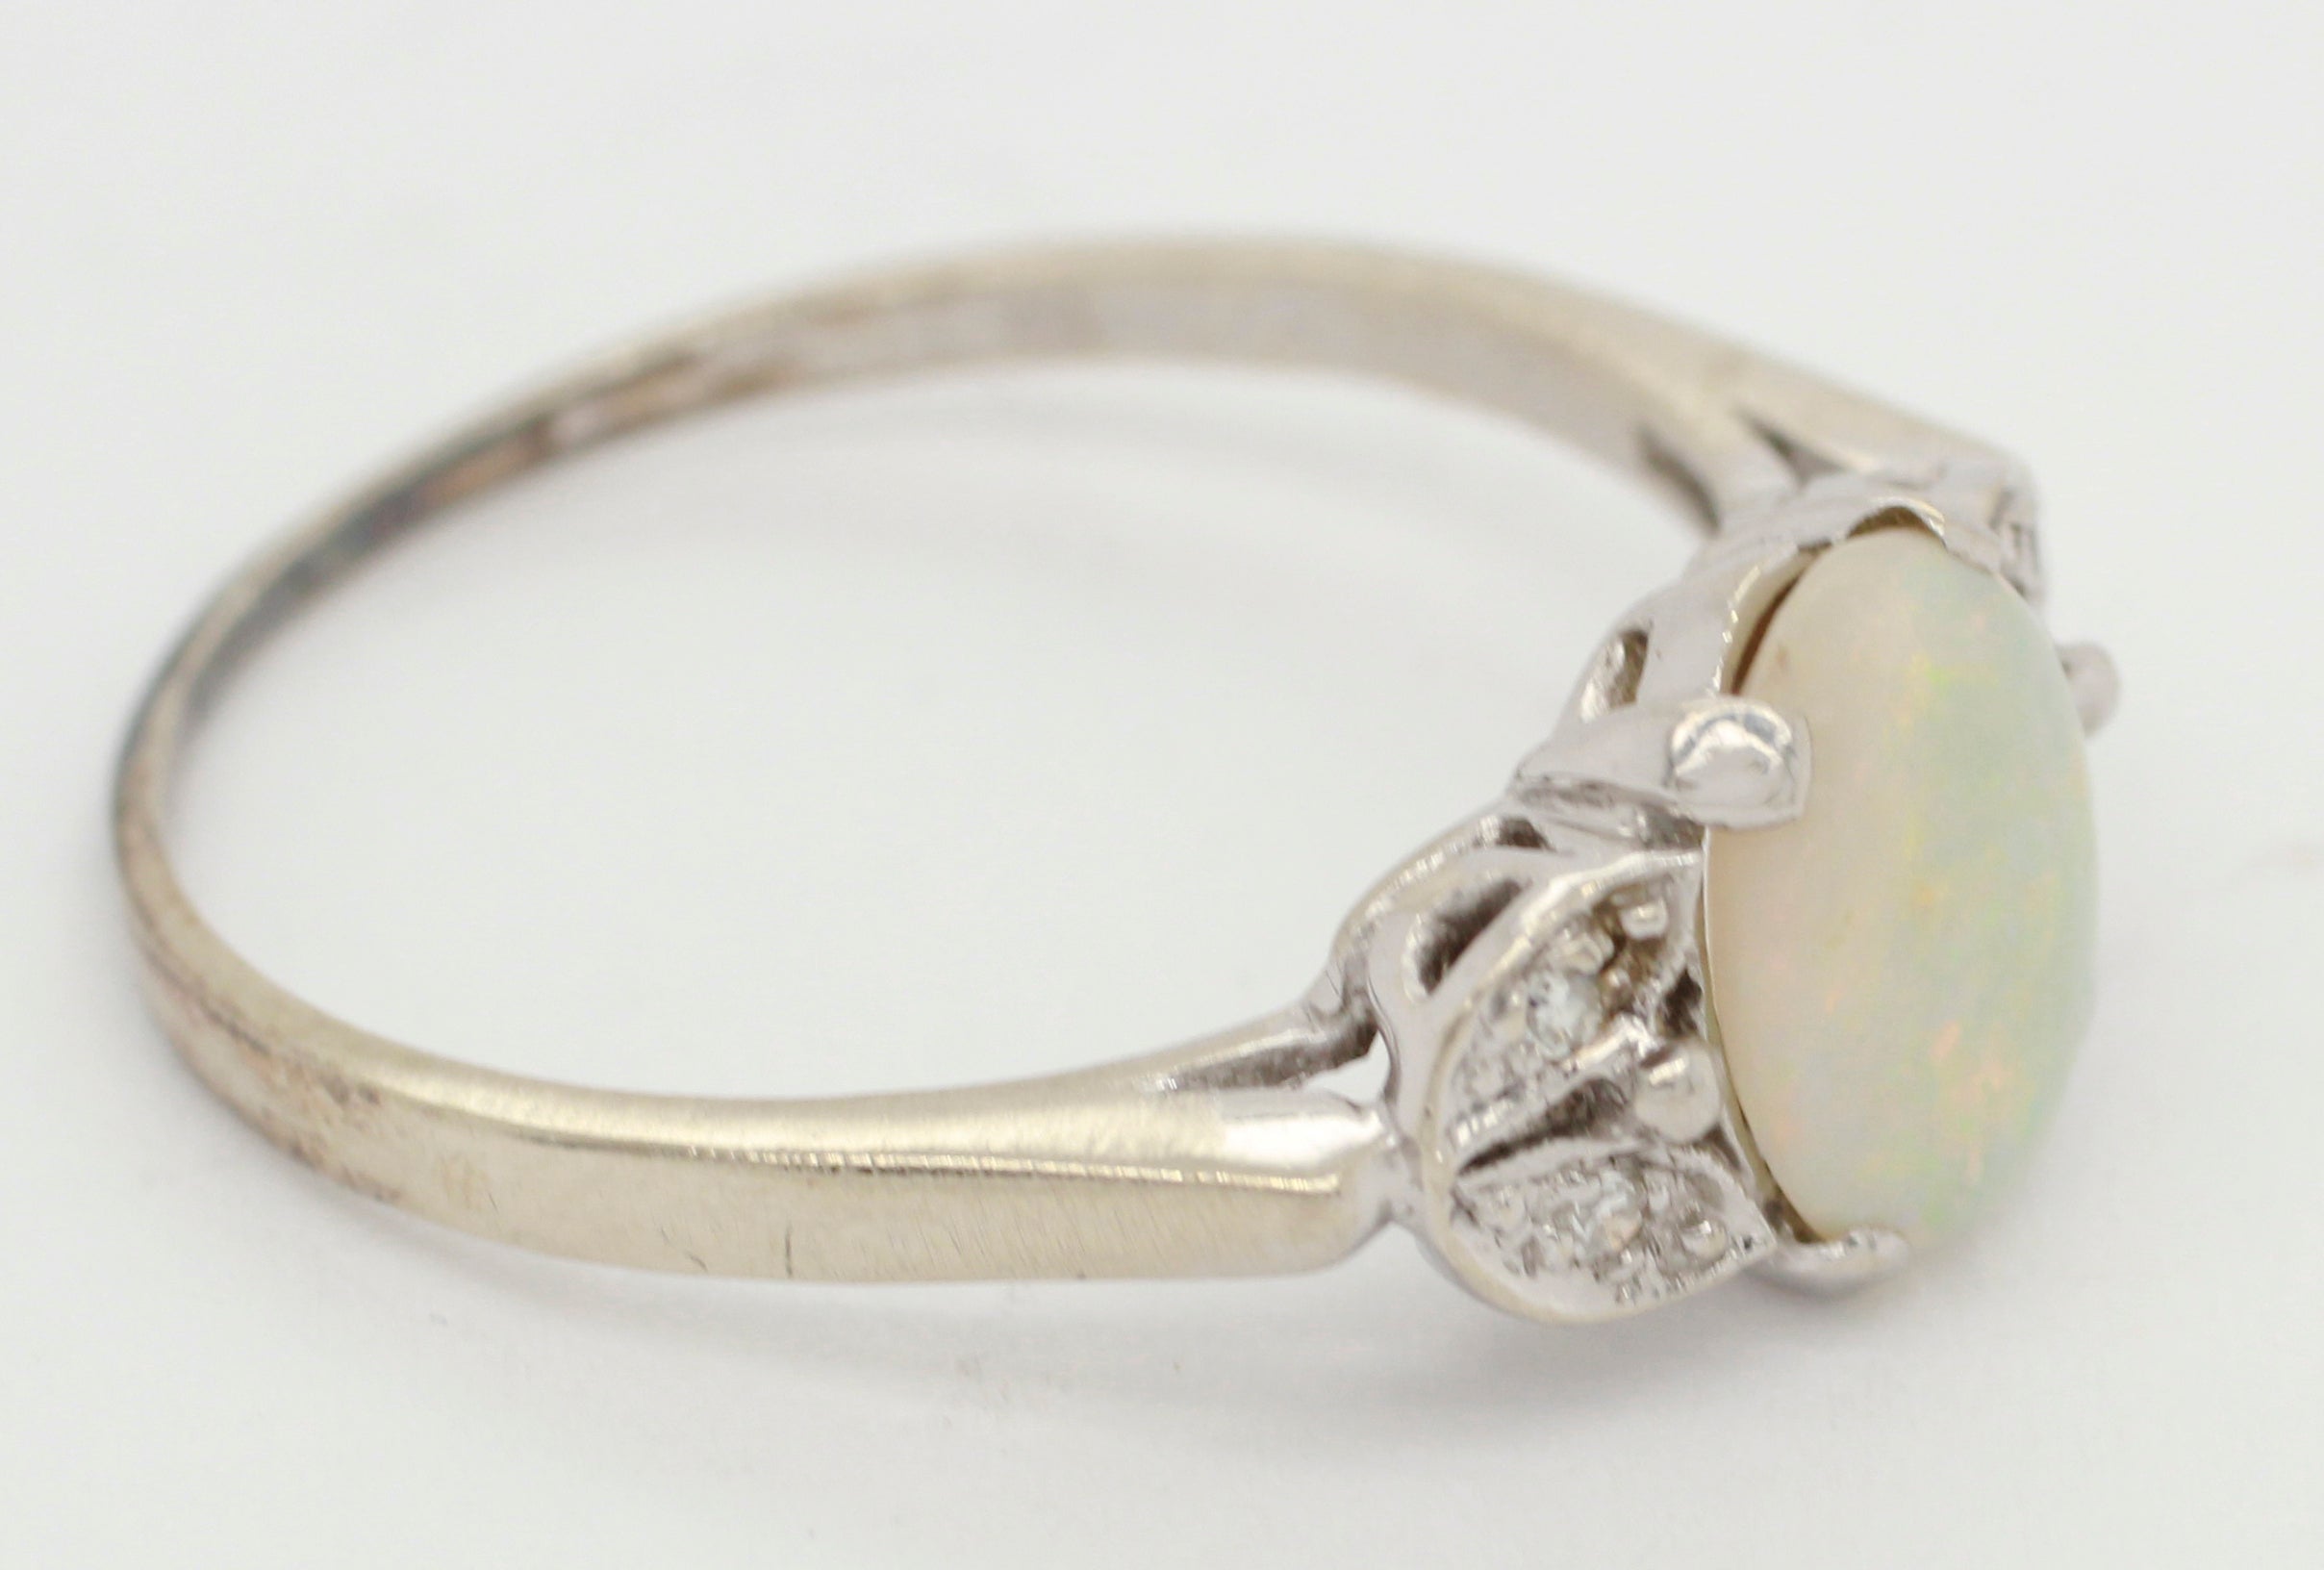 Antique Art Deco White Opal and Diamond Ring in 14k White Gold | Size 8.5